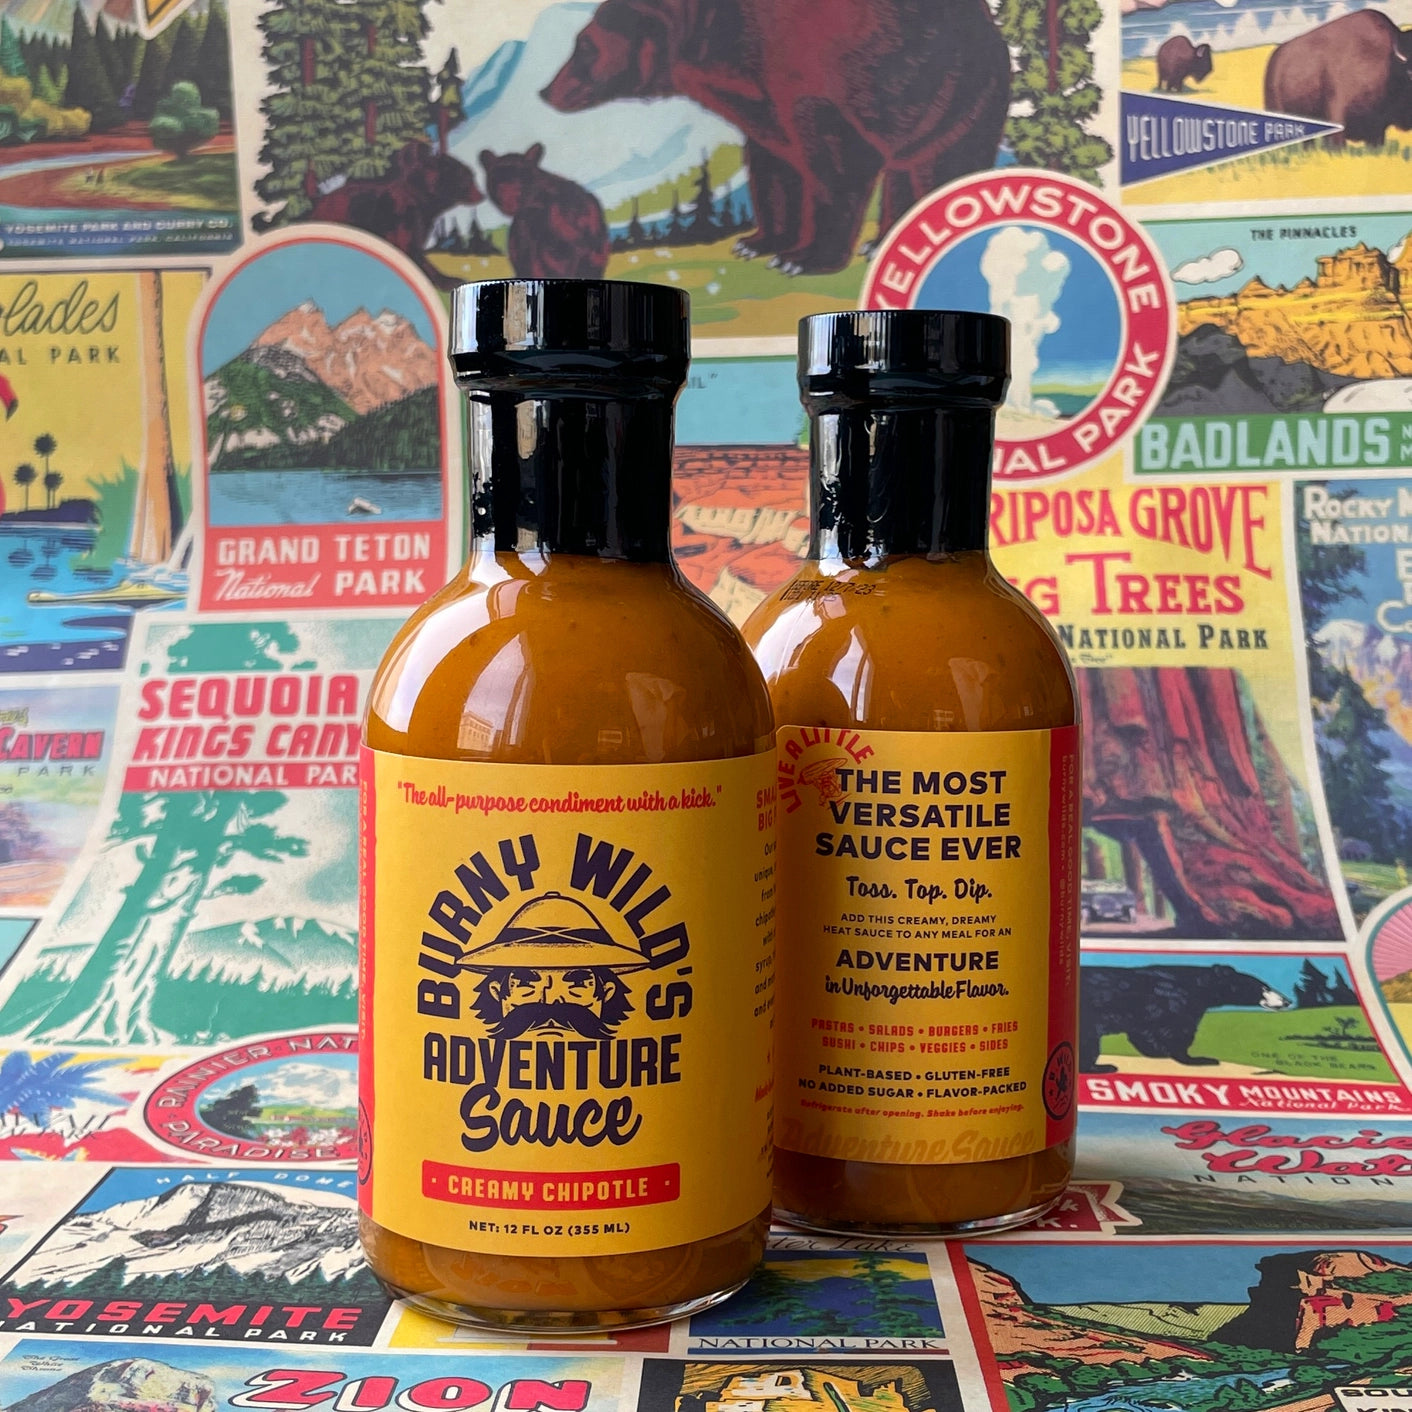 Burny Wild's Adventure Sauce that is 100% plant-based, gluten-free, AND gives back 1% for the planet  burny wild's   -better made easy-eco-friendly-sustainable-gifting